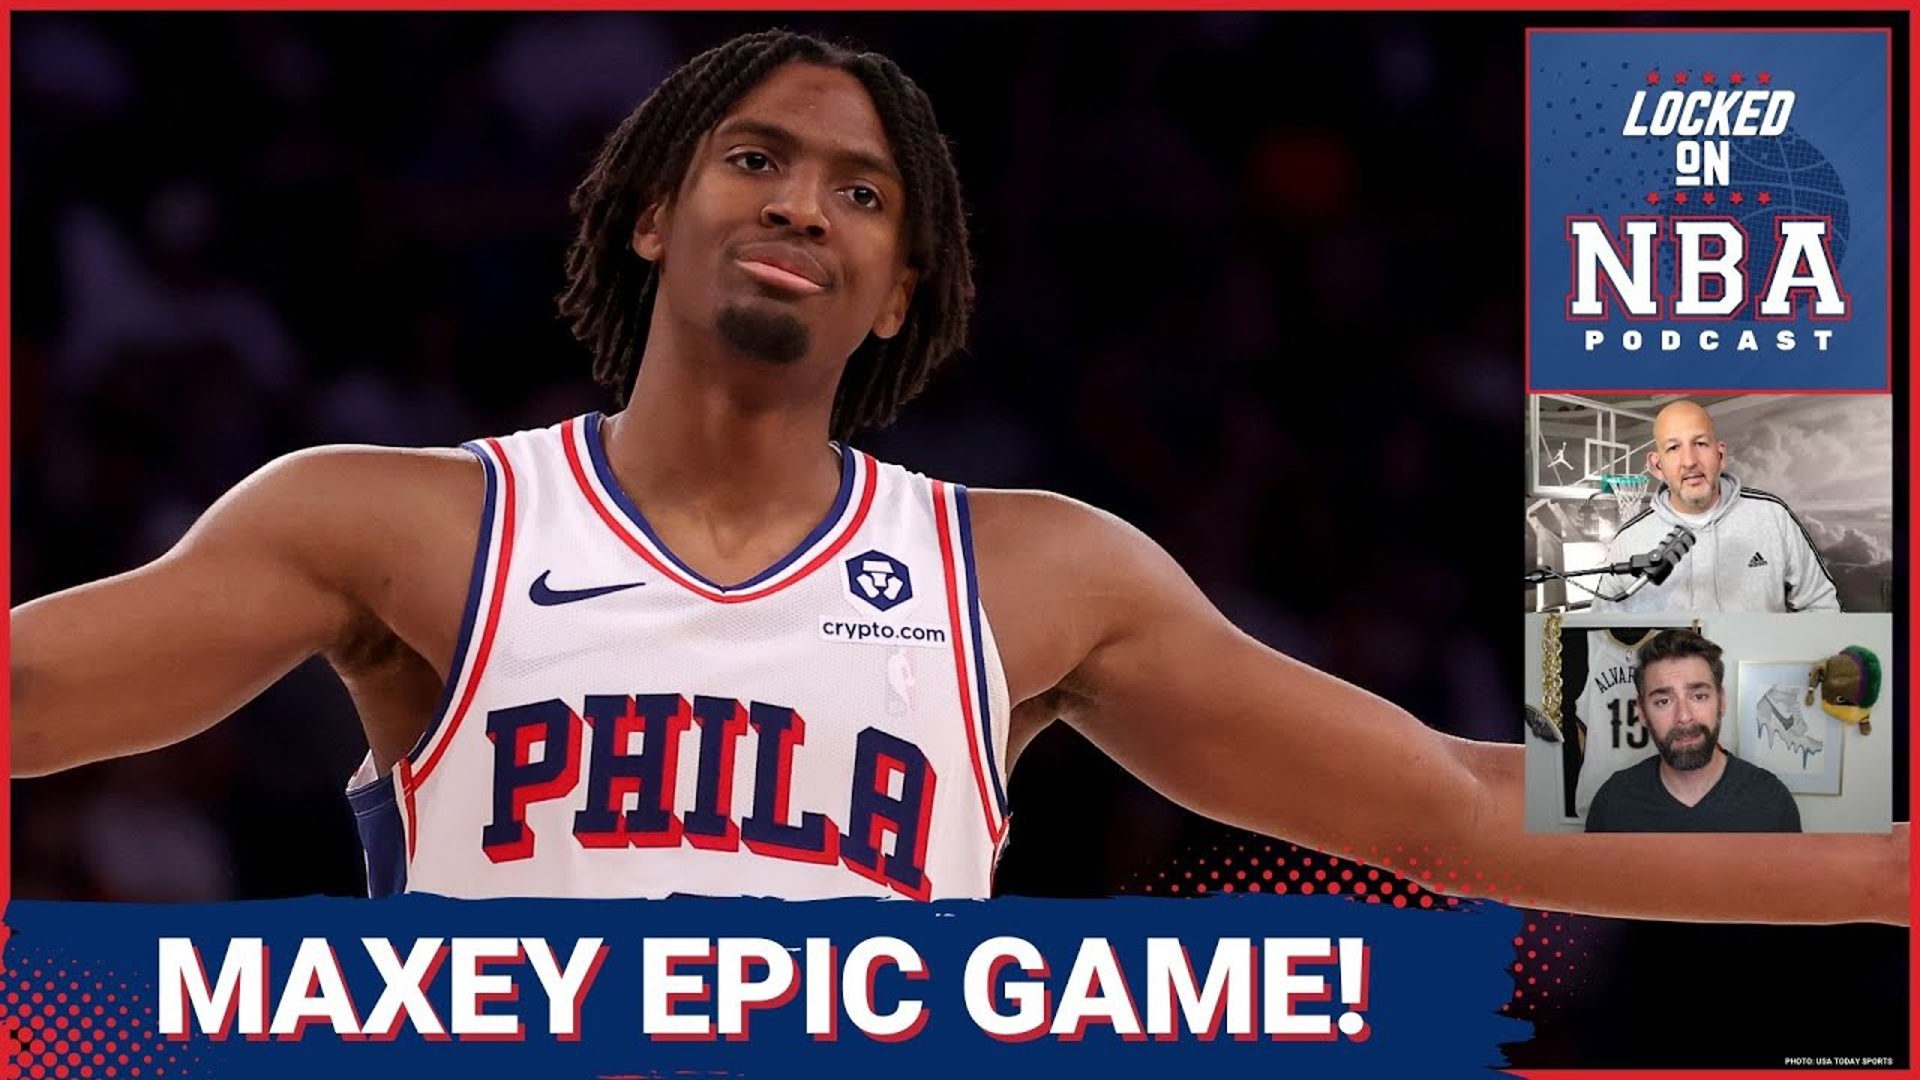 Tyrese Maxey and Jalen Brunson dueled as game 5 between the New York Knicks and Philadelphia 76ers went to overtime with the Sixers winning.